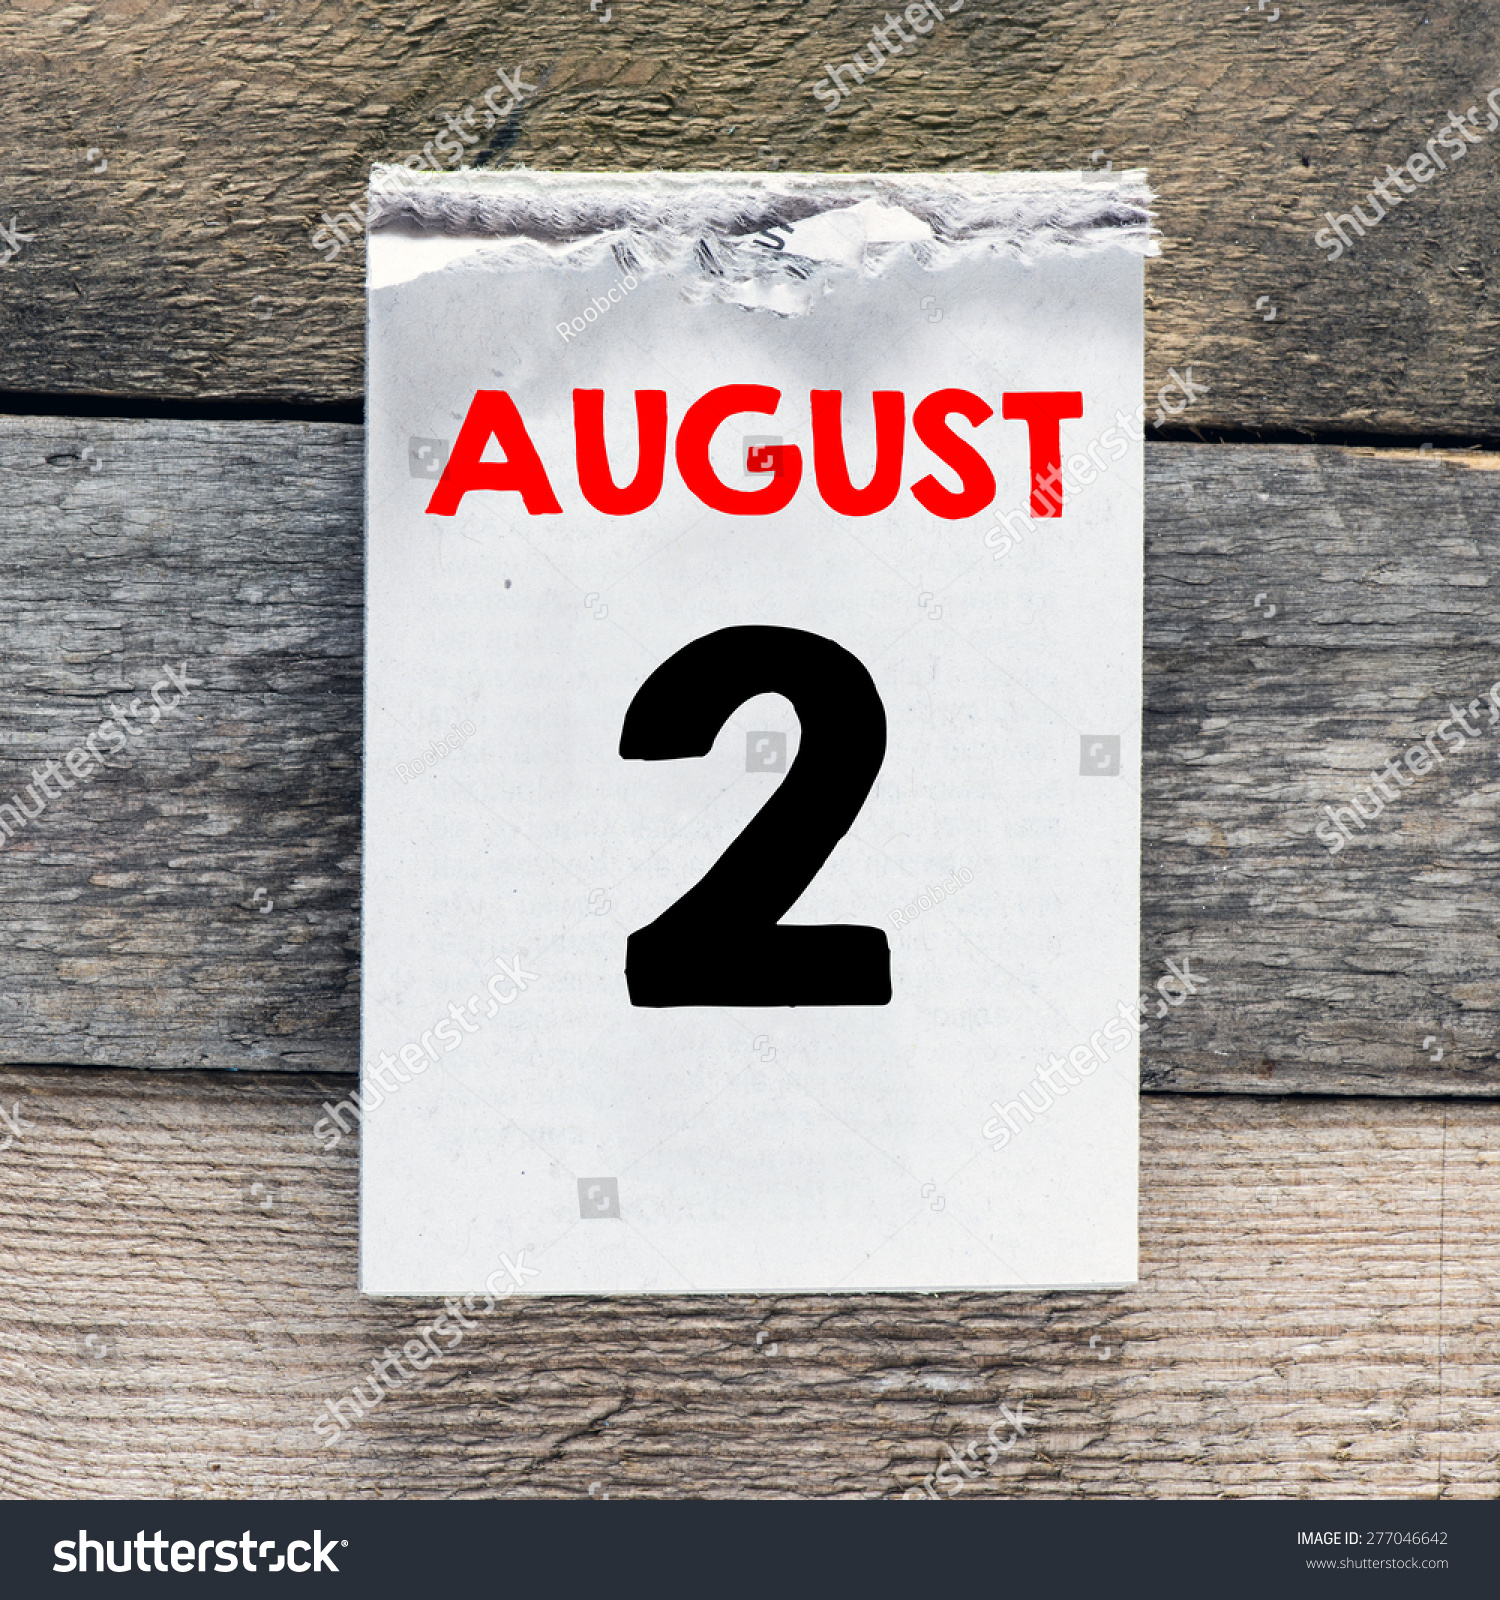 Calendar With 2 August On Wooden Background Stock Photo 277046642 ...